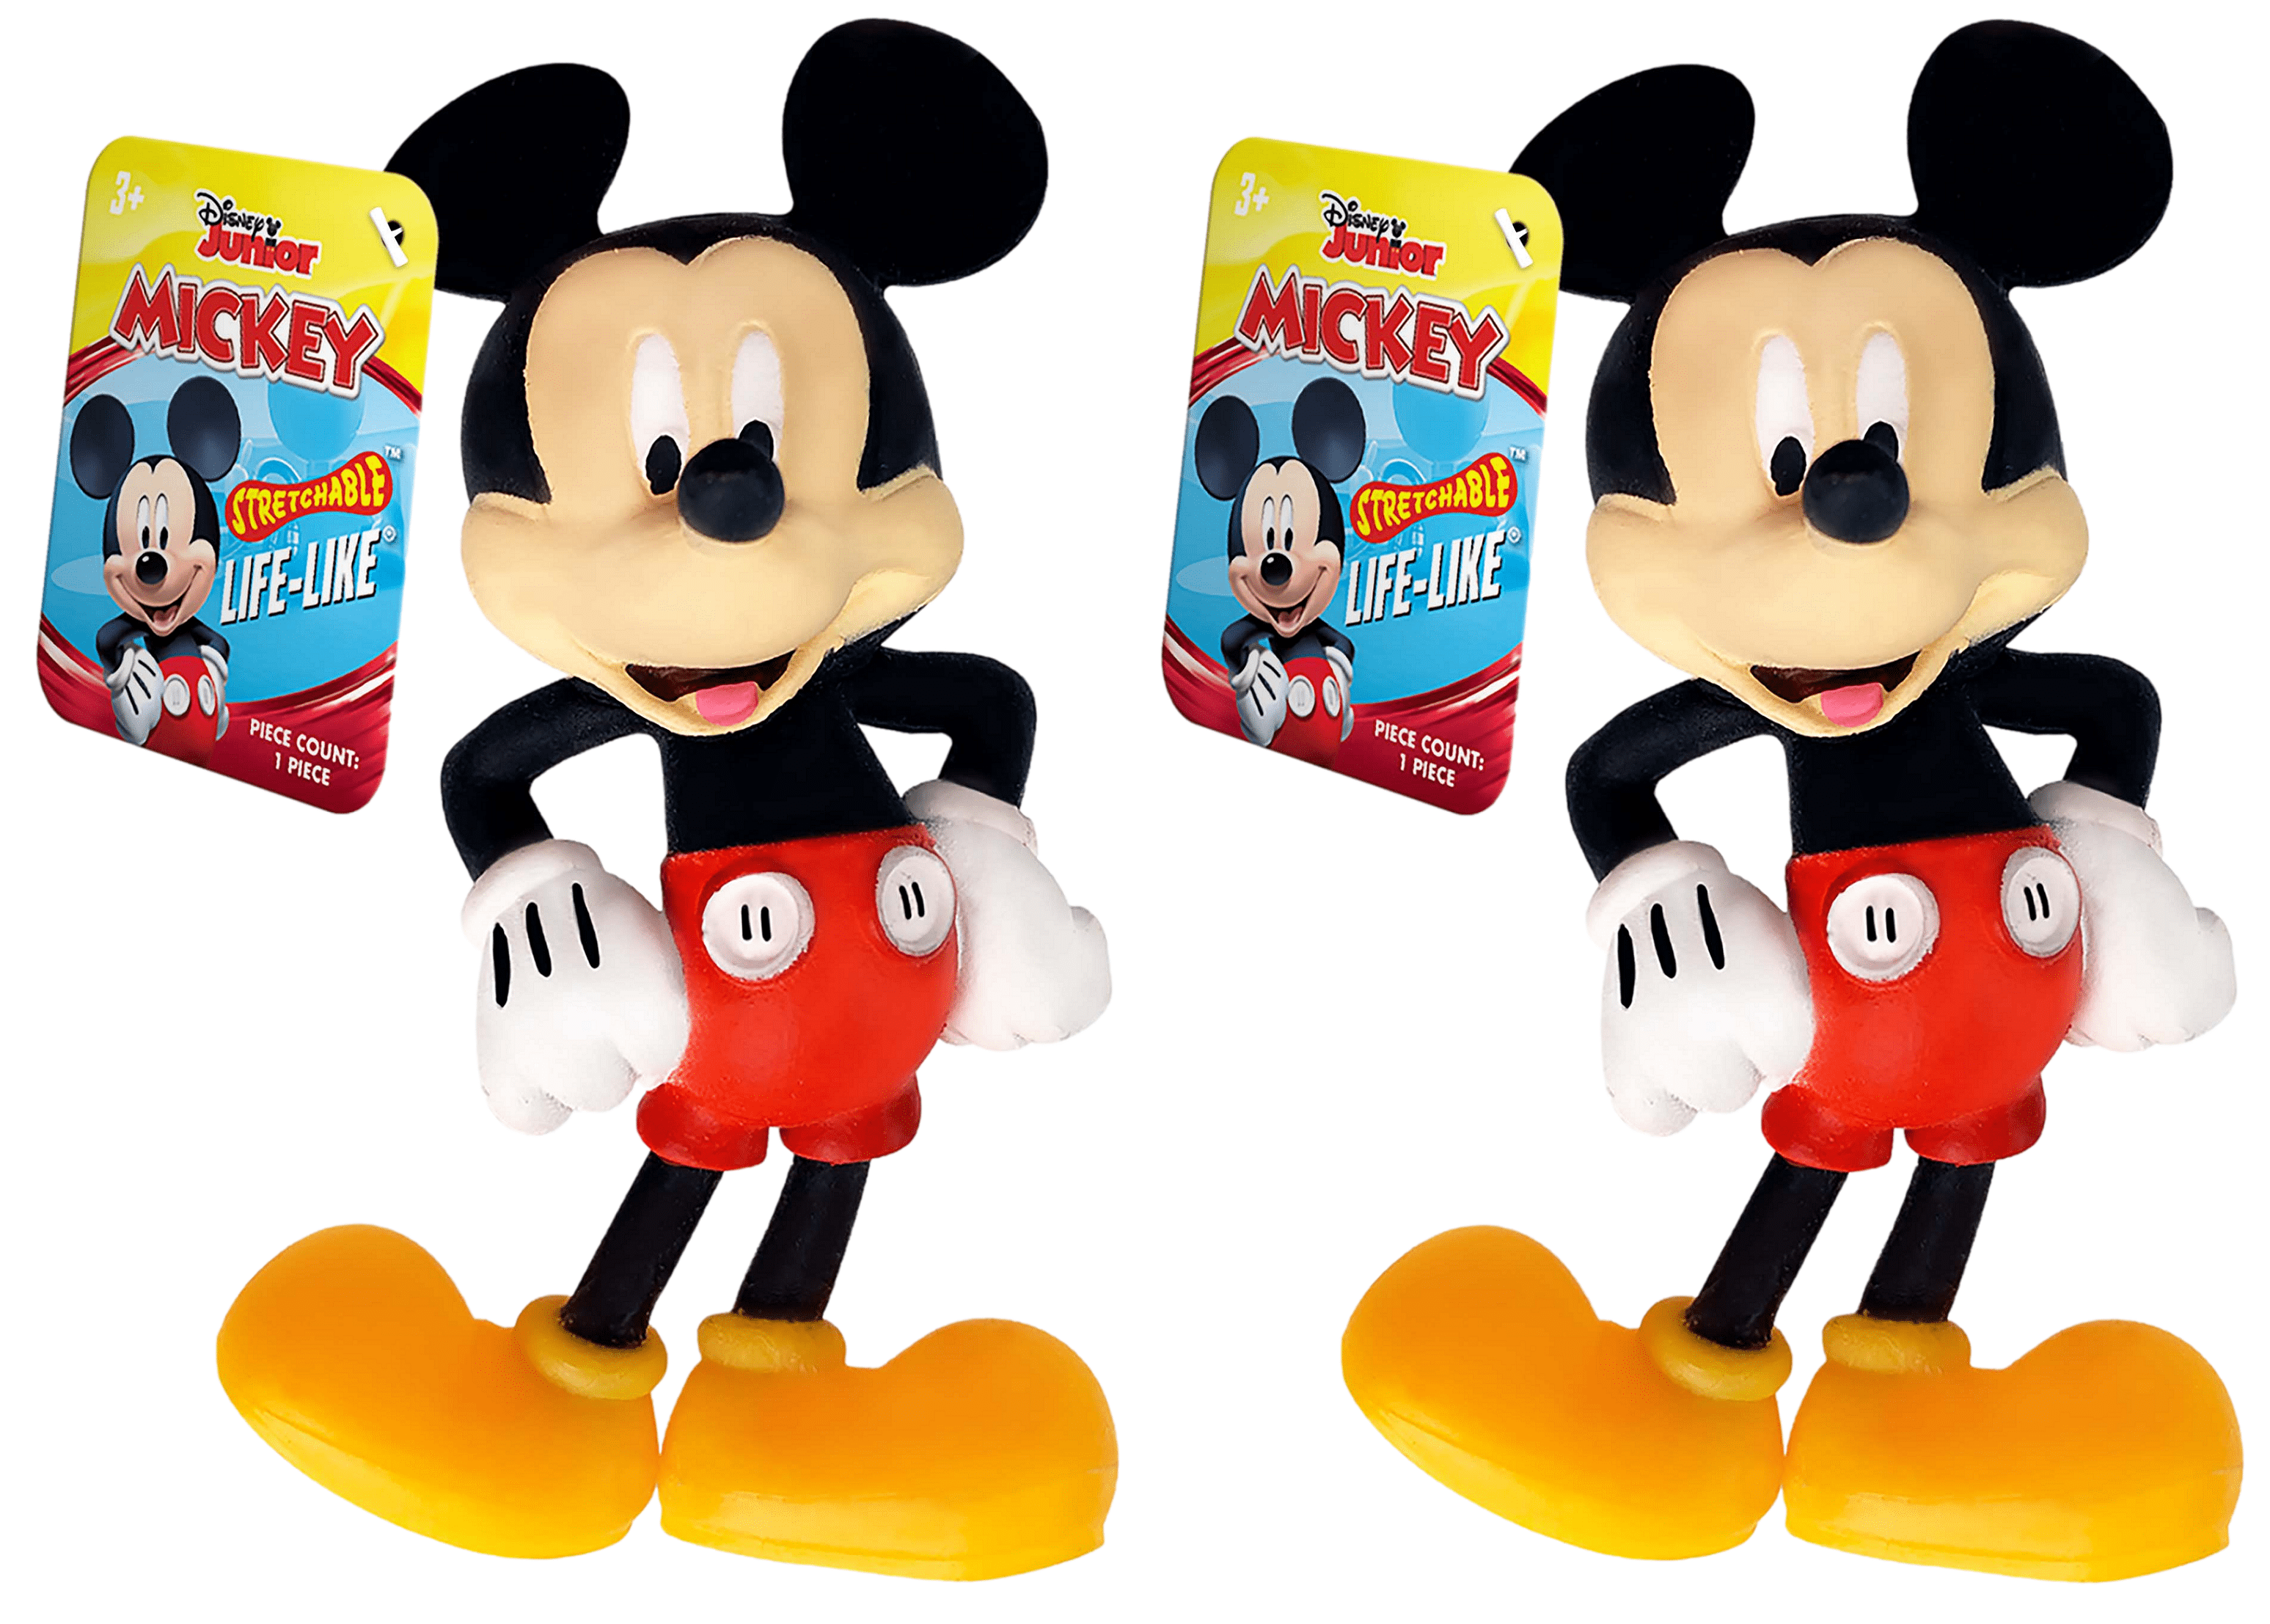 JA-RU Disney Stretchy Toys Mickey & Minnie Figures Squish & Pull Toys (2 Mickey Figure) Clubhouse Disney Anxiety Calming Fidget Toy, Stress Toys, Birthday Party Gifts for Kids, Boys & W-A-6900-2 -